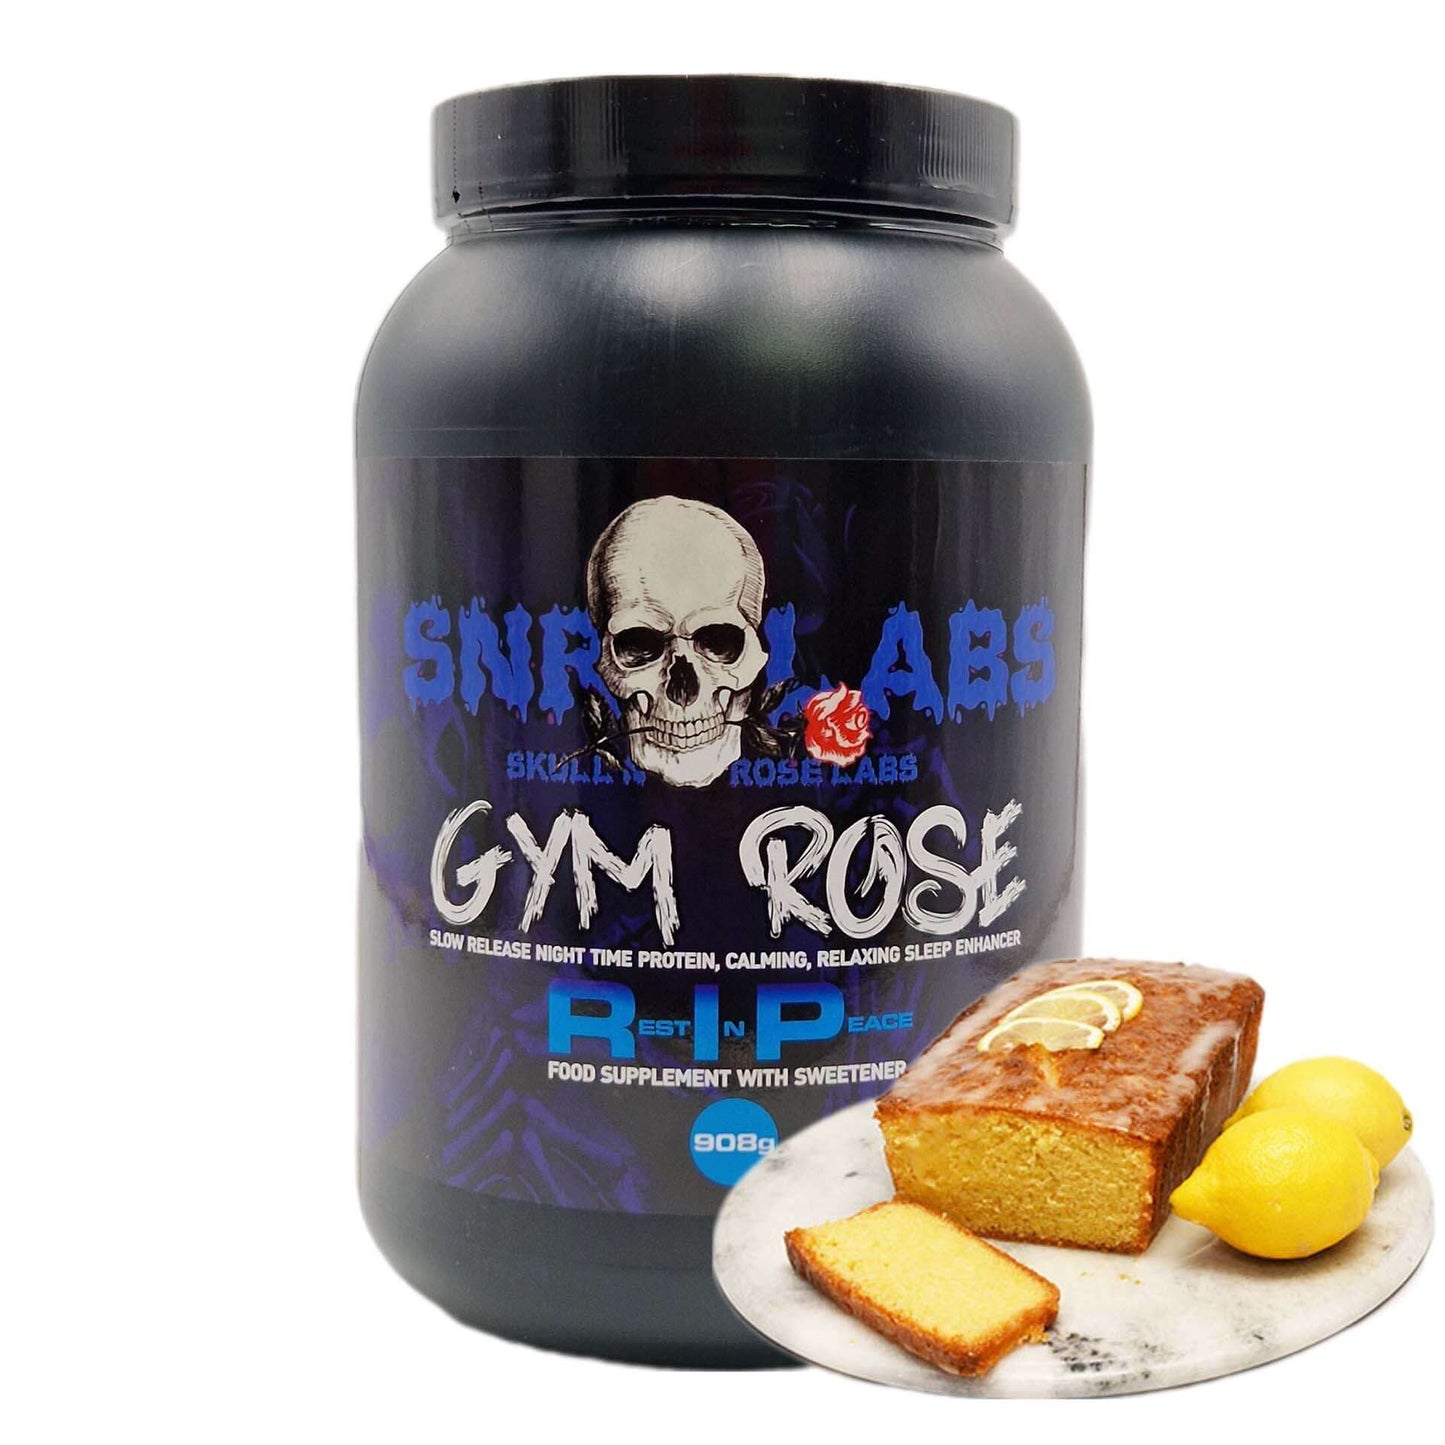 SNRLabs Gym Rose RIP night time protein Lemon Drizzel Cake